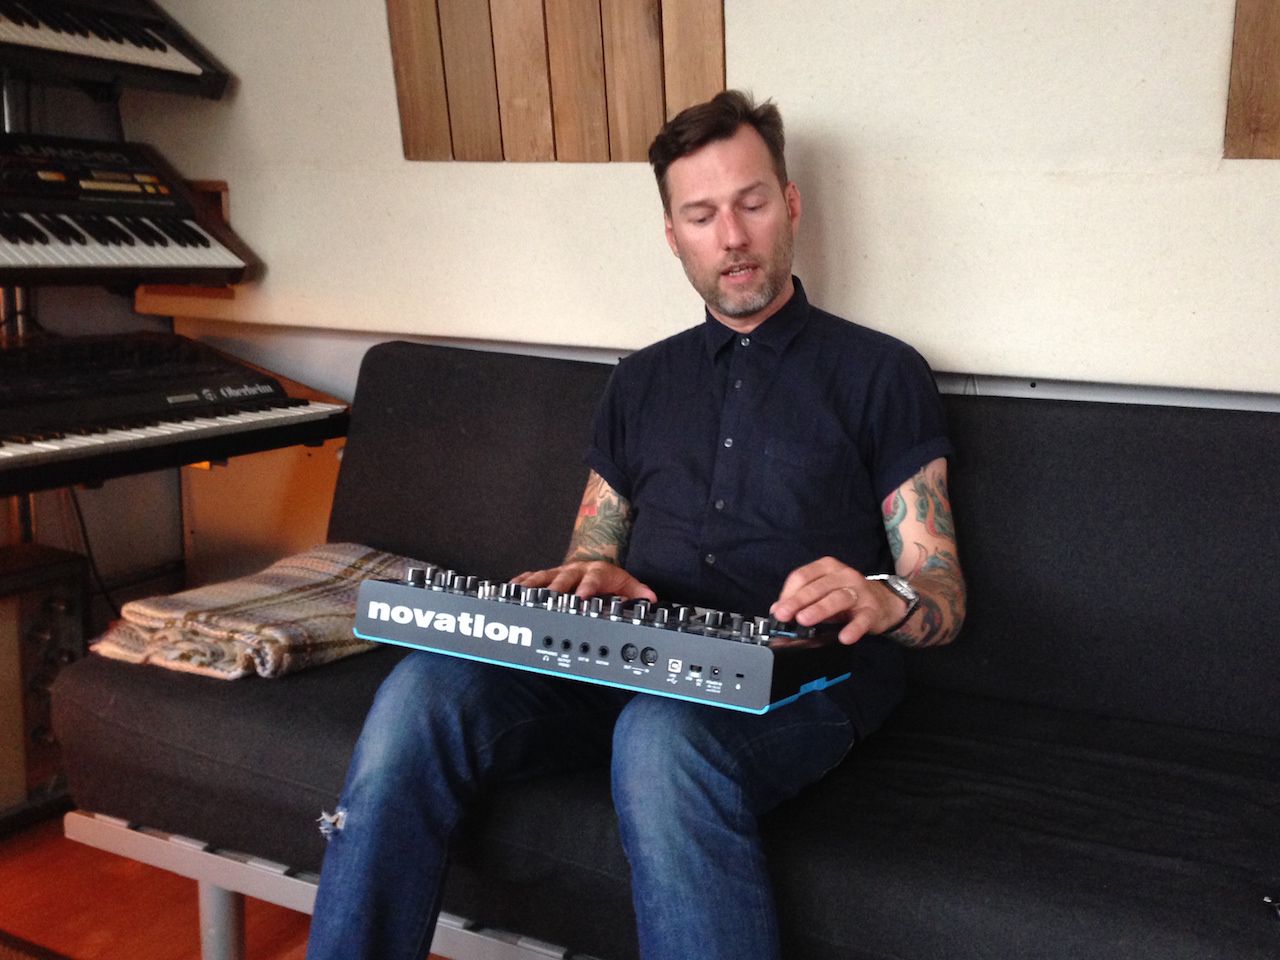 Liam Howe shows off his Novation Bass Station upon a comfy couch!